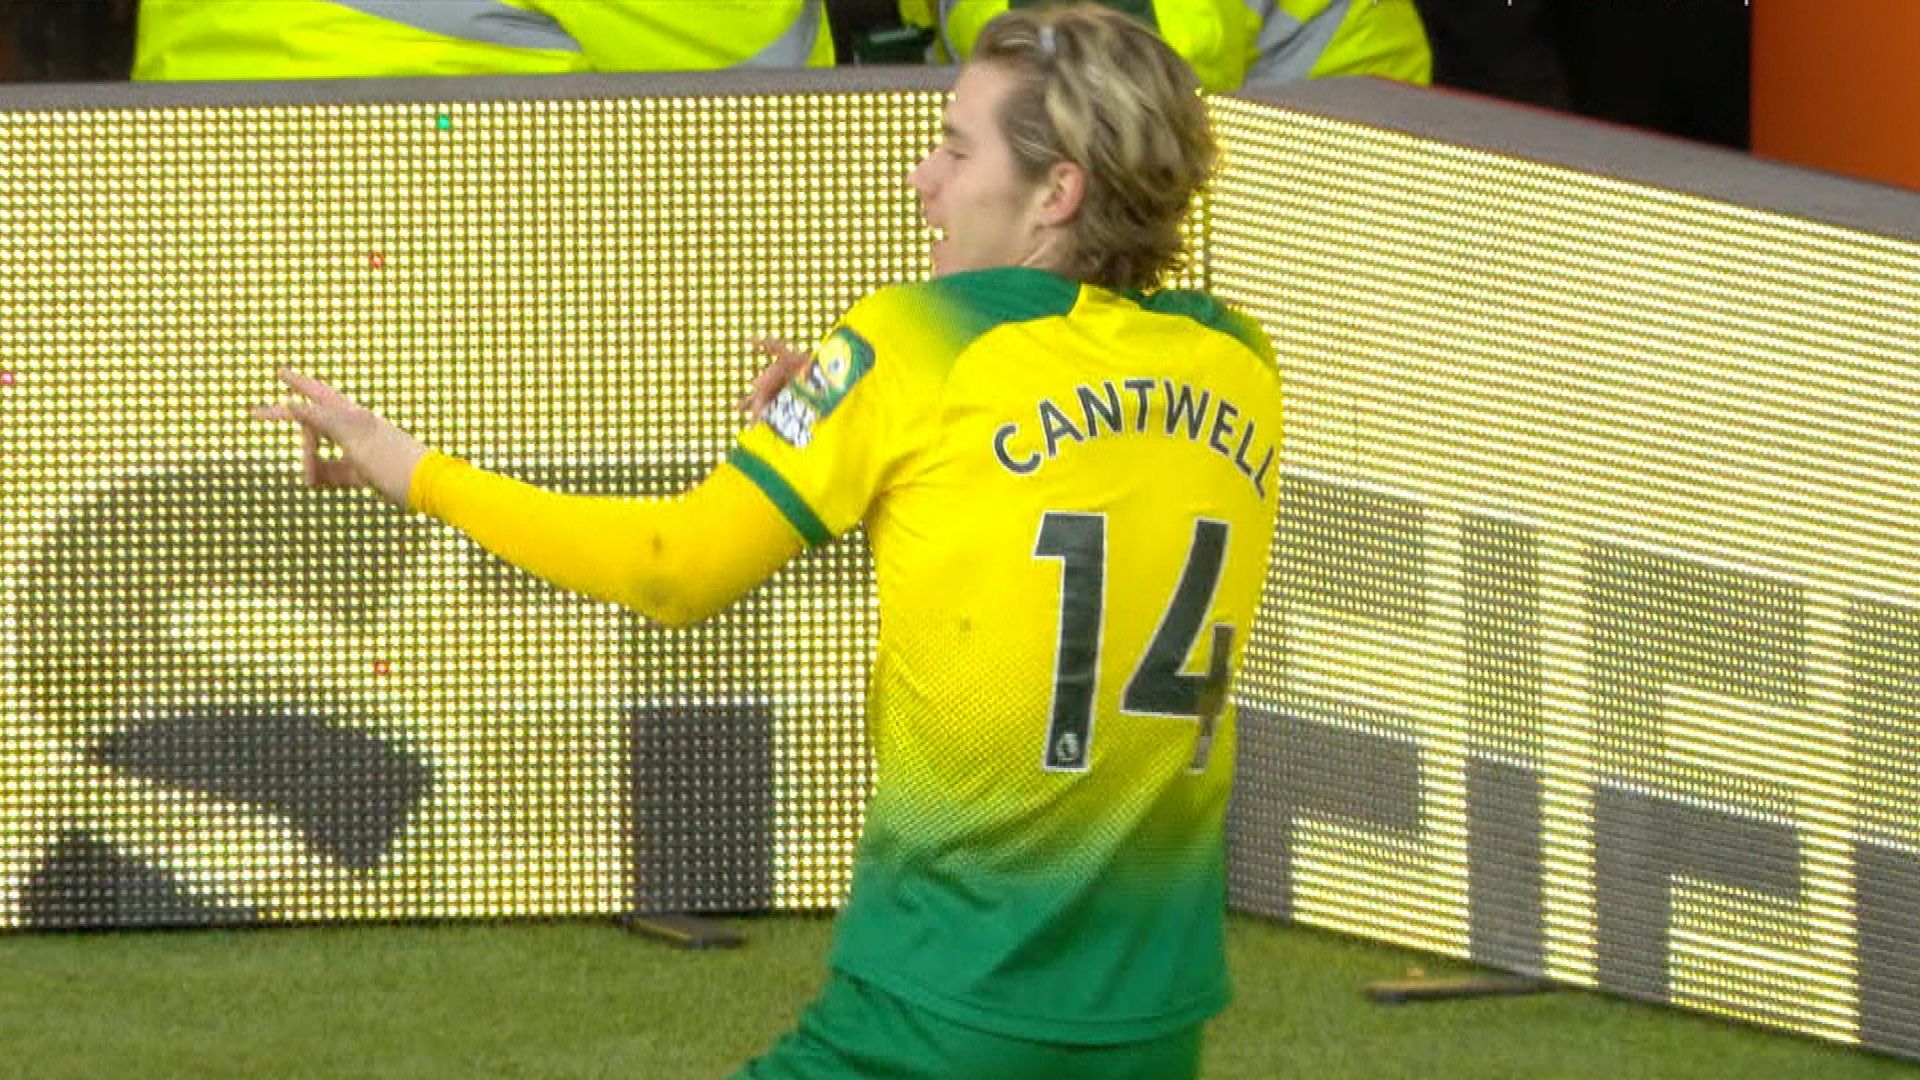 Todd Cantwell gets Norwich City back ahead v. Arsenal